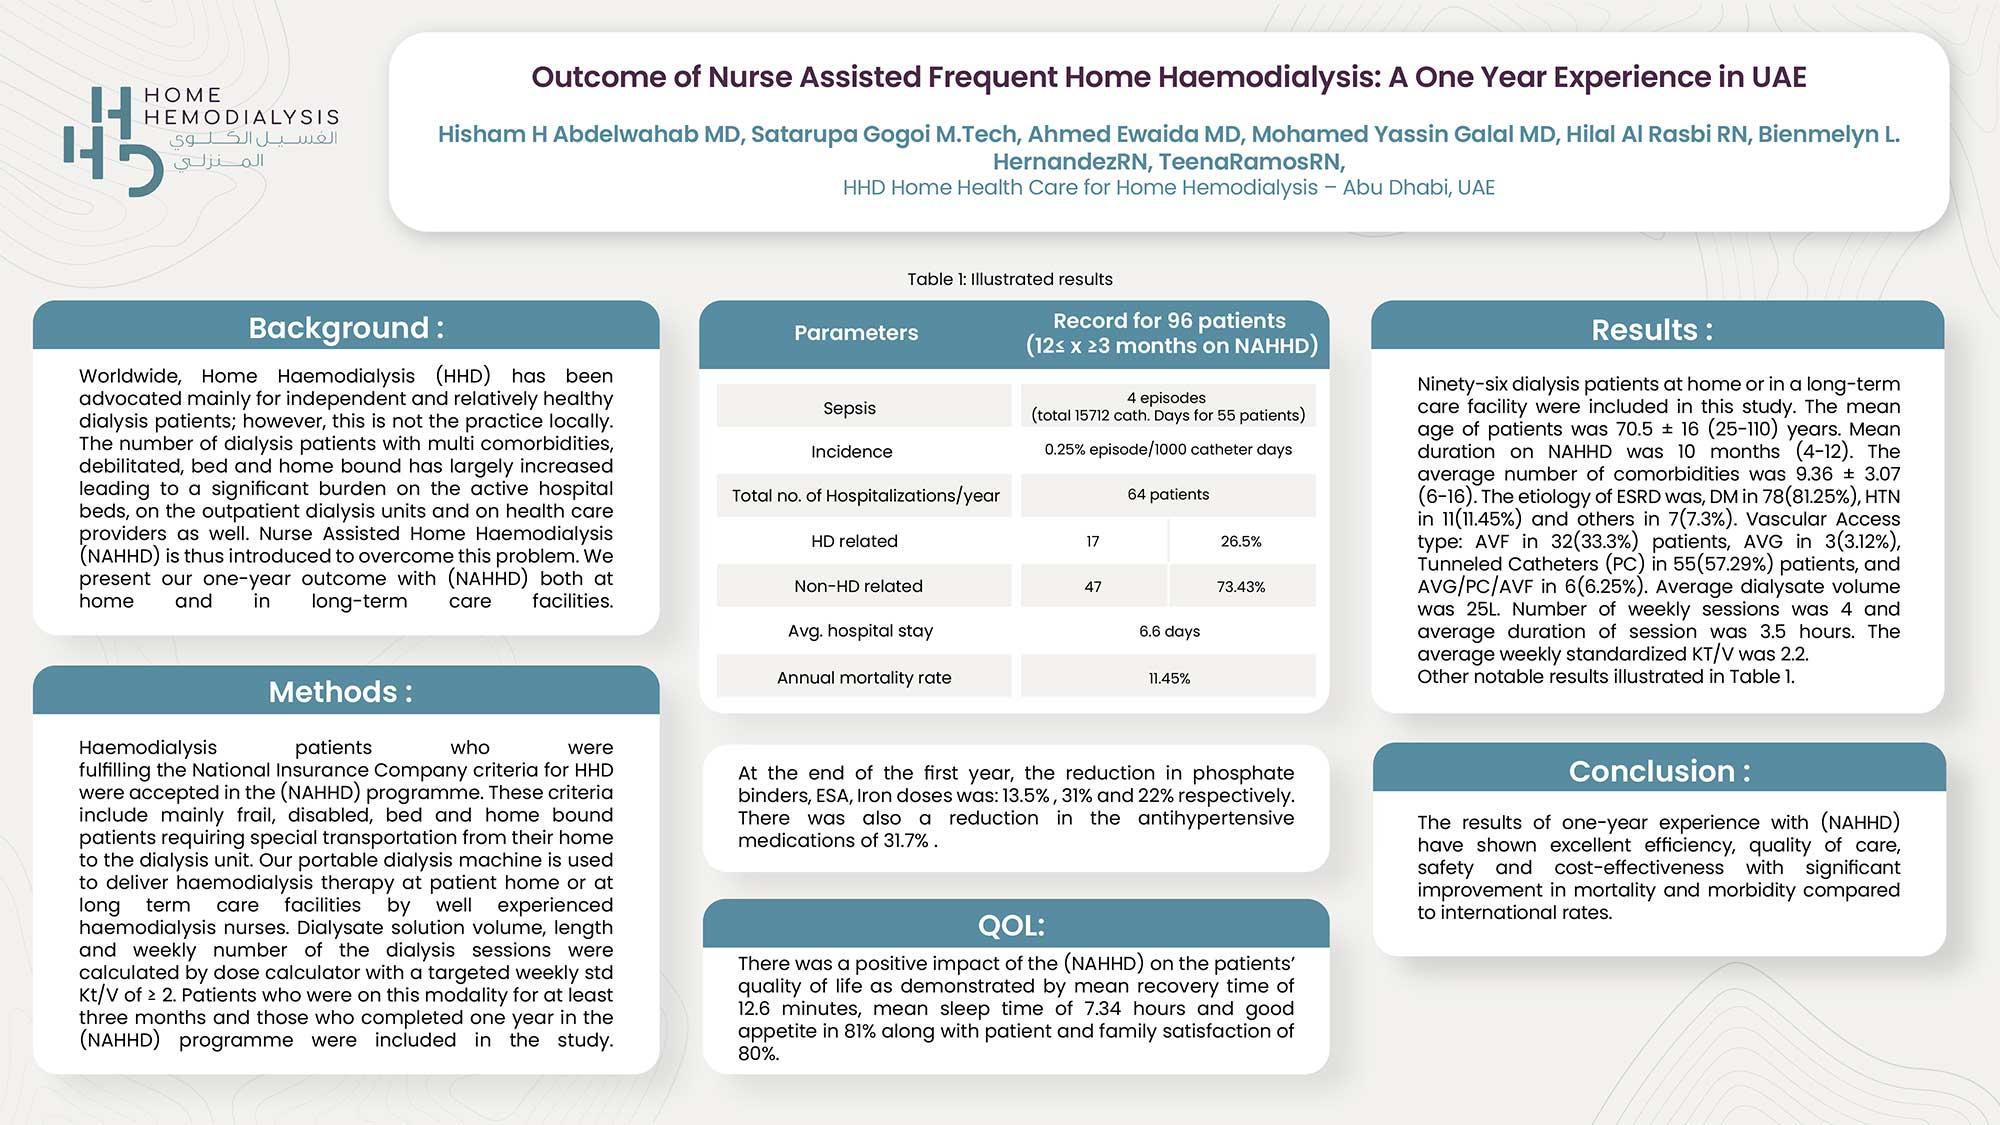 Product Outcome of Nurse Assisted Frequent Home Haemodialysis: A One Year Experience in UAE - Home Hemodialysis Treatment in UAE | Hemodialysis at Home | HHD image